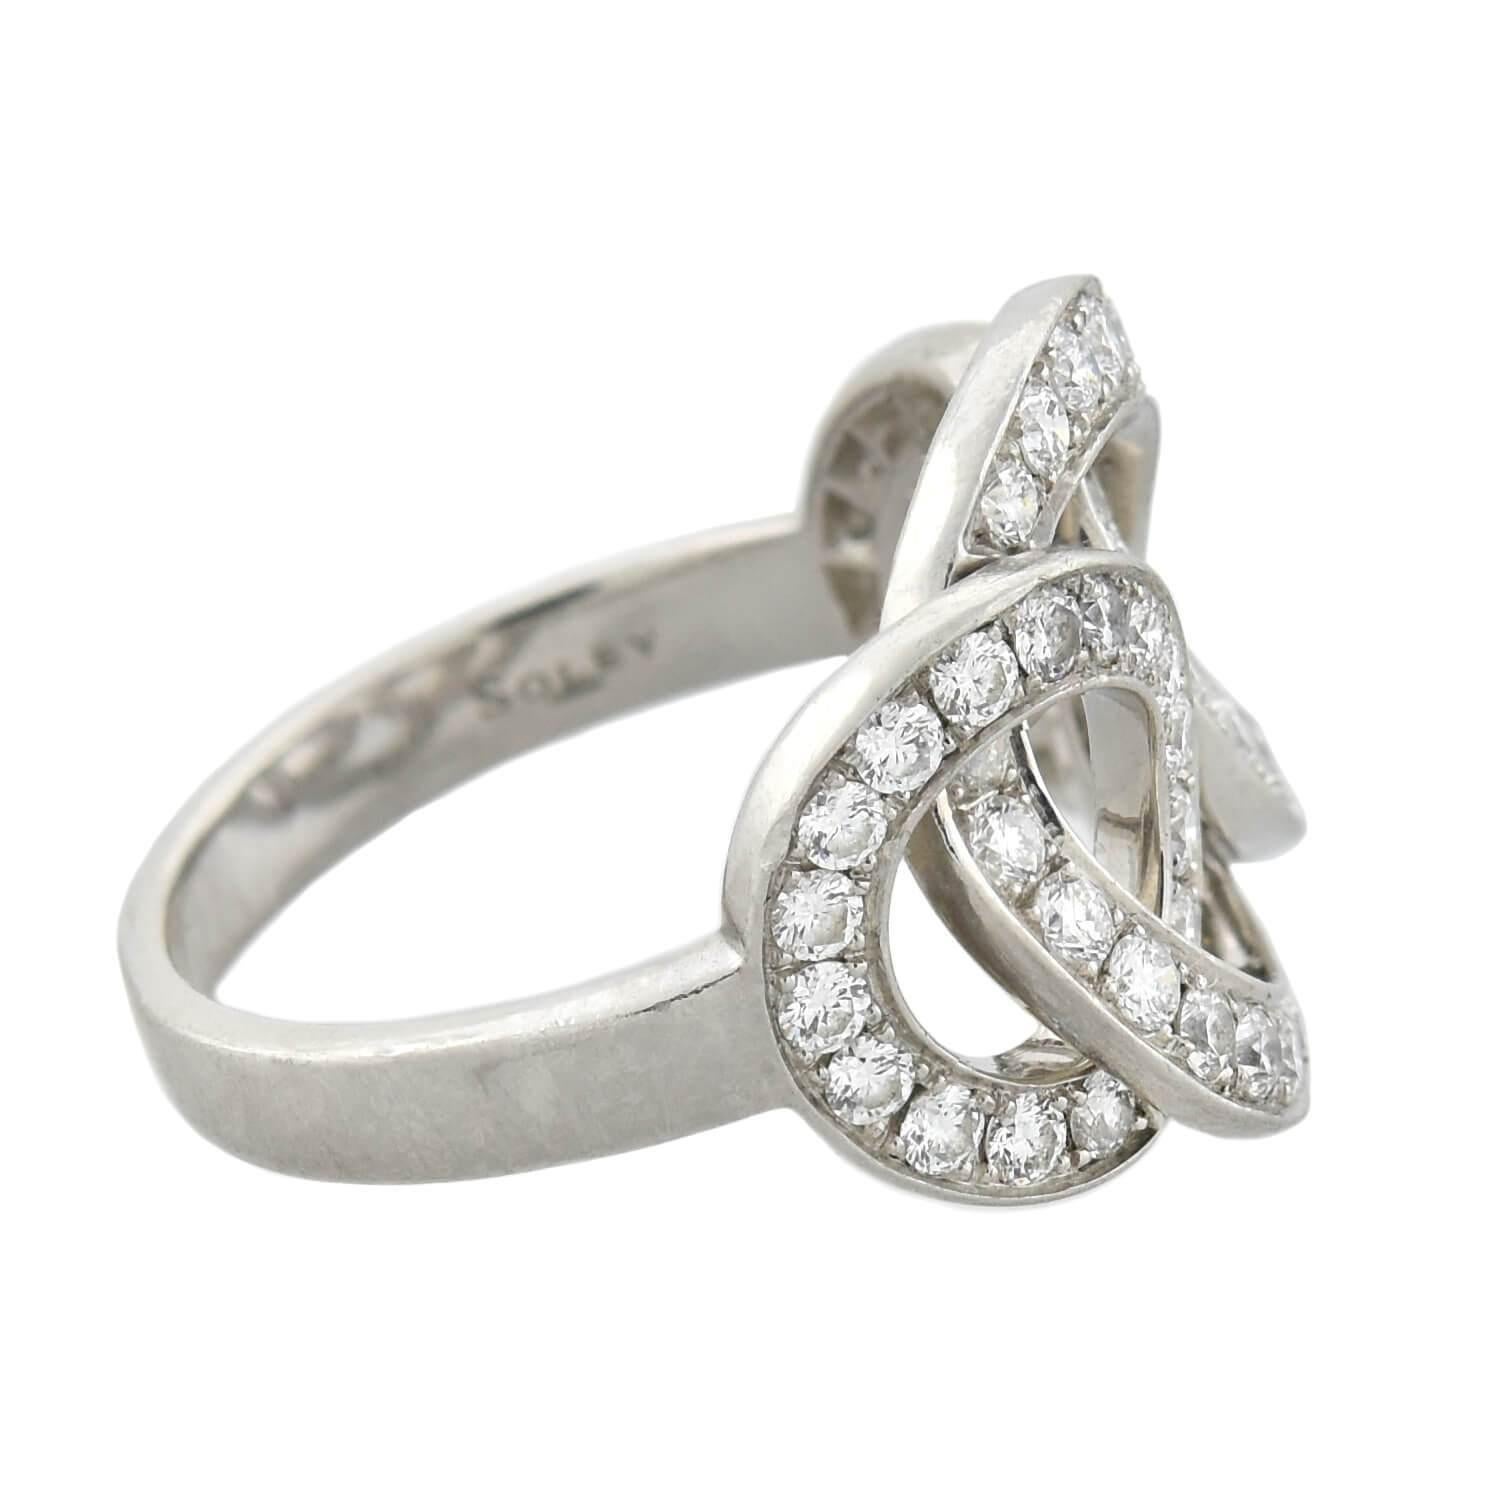 A fabulous contemporary diamond ring from well-known London jewelry designer Soley! Crafted in platinum, this bold piece features three diamond-encrusted rings that intertwine and loop together. Each open circle is lined with modern Brilliant Cut